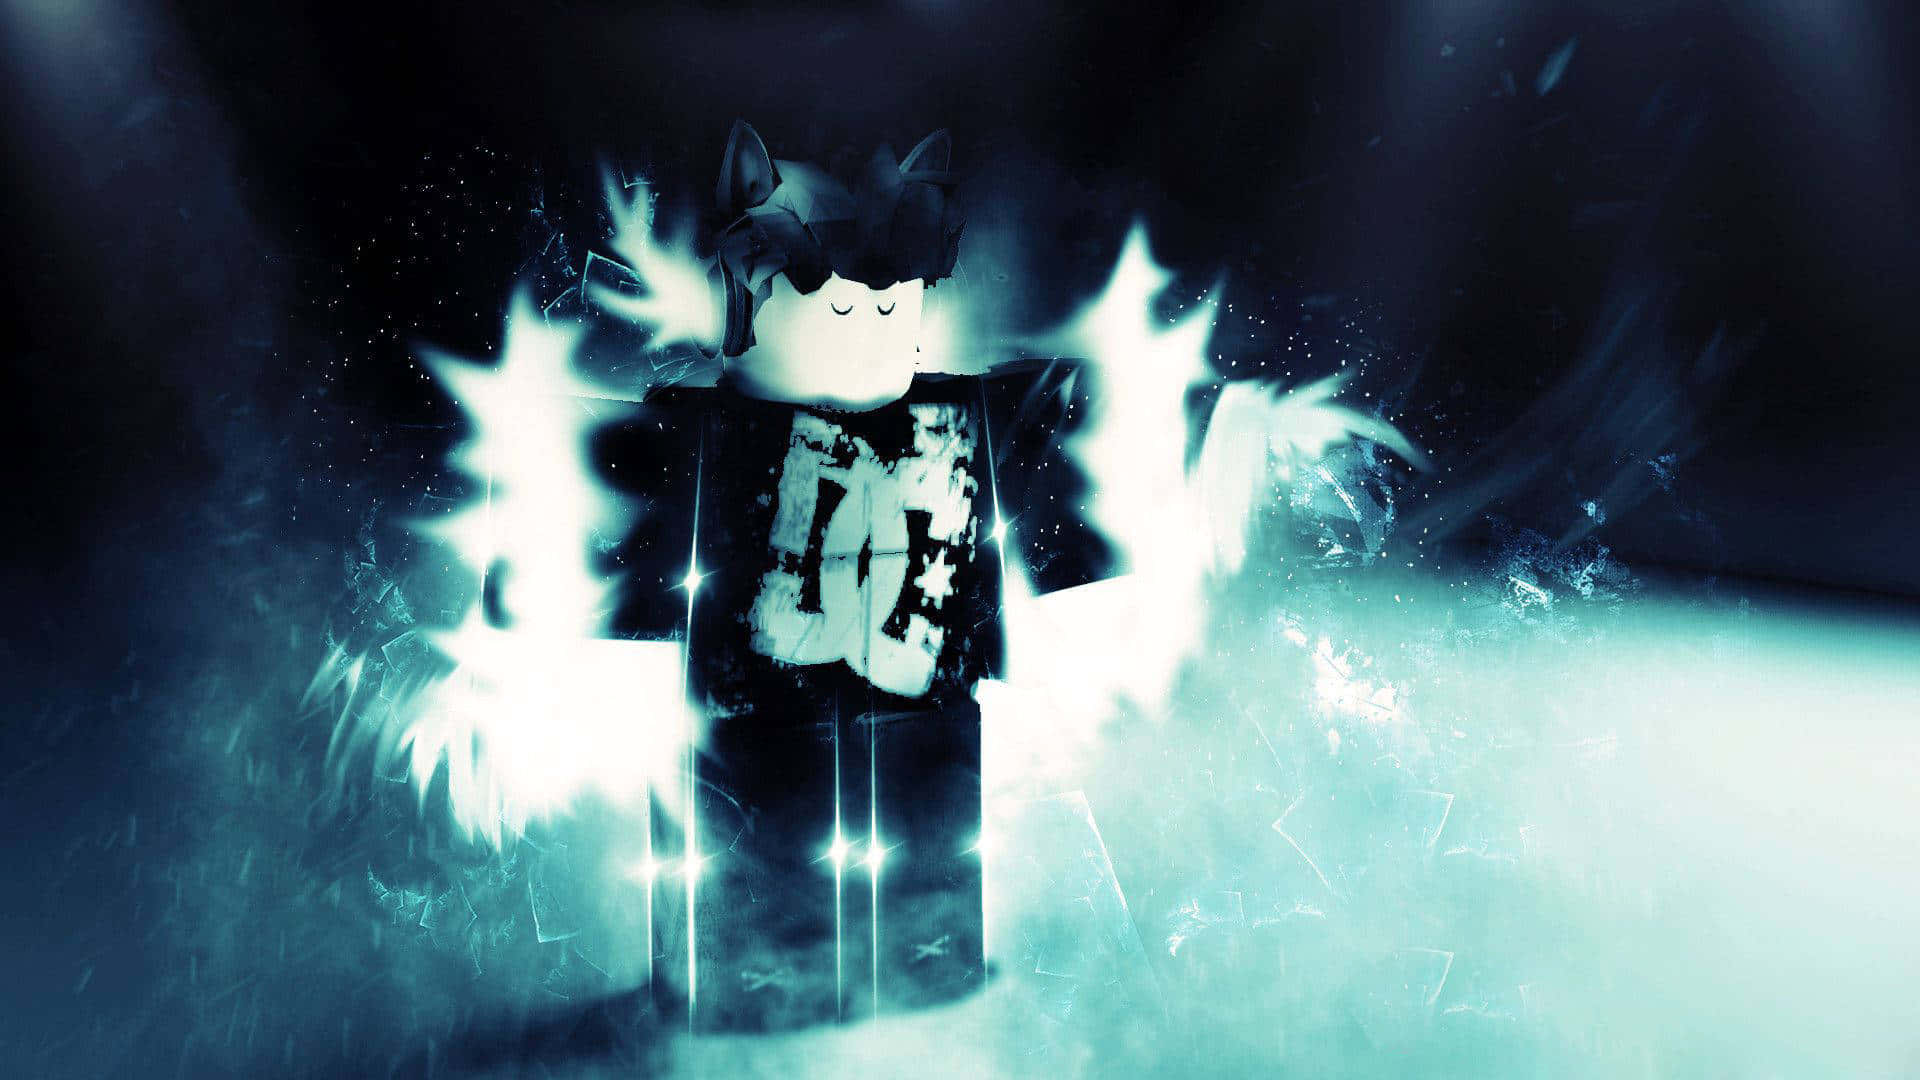 Download Dazzling Roblox Avatar In Action Wallpaper